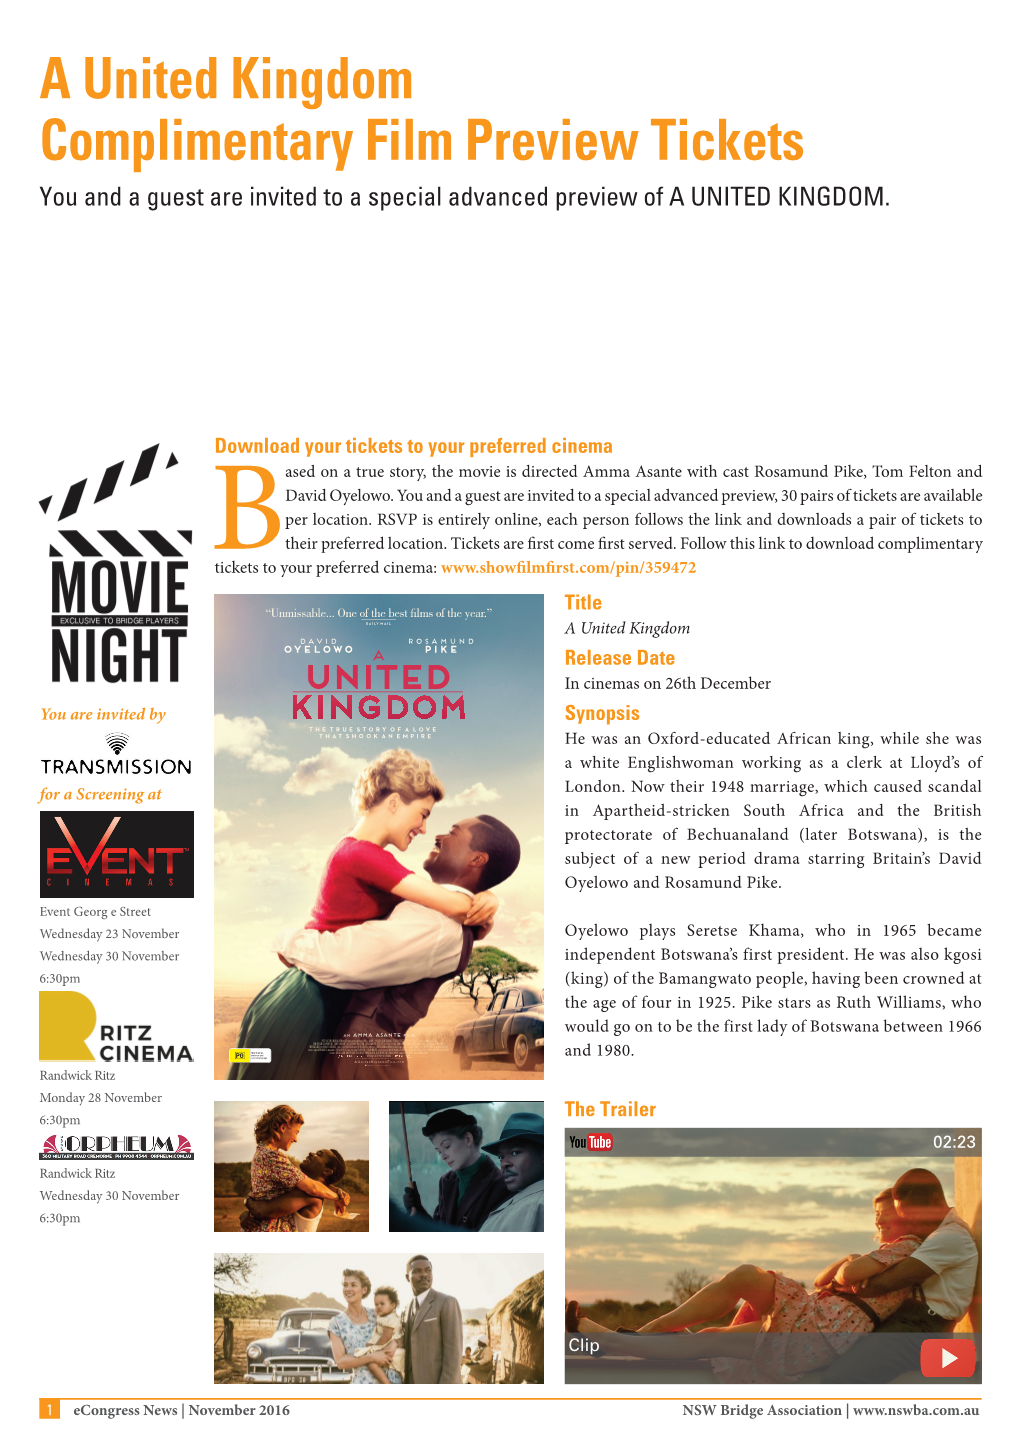 A United Kingdom Complimentary Film Preview Tickets You and a Guest Are Invited to a Special Advanced Preview of a UNITED KINGDOM